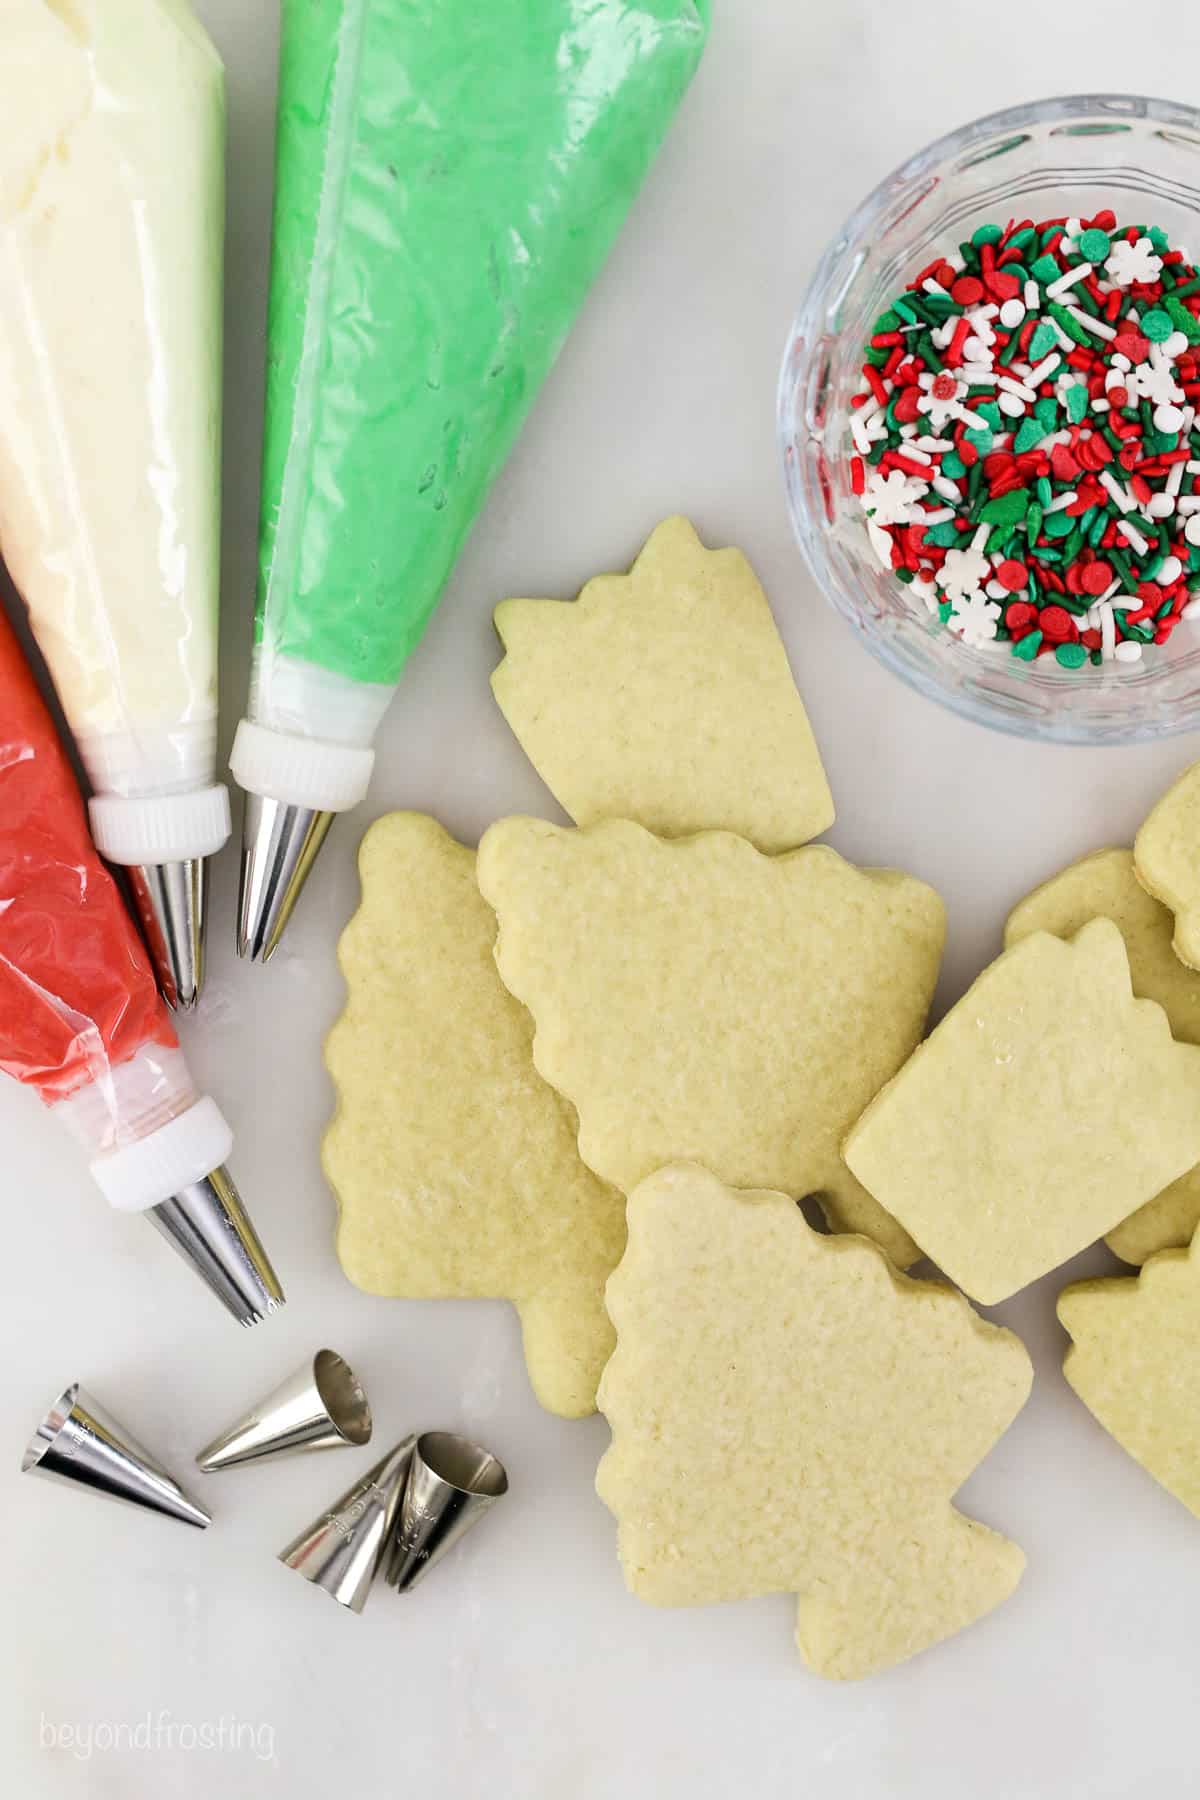 Piping bags of frosting, cut out sugar cookies, and sprinkles